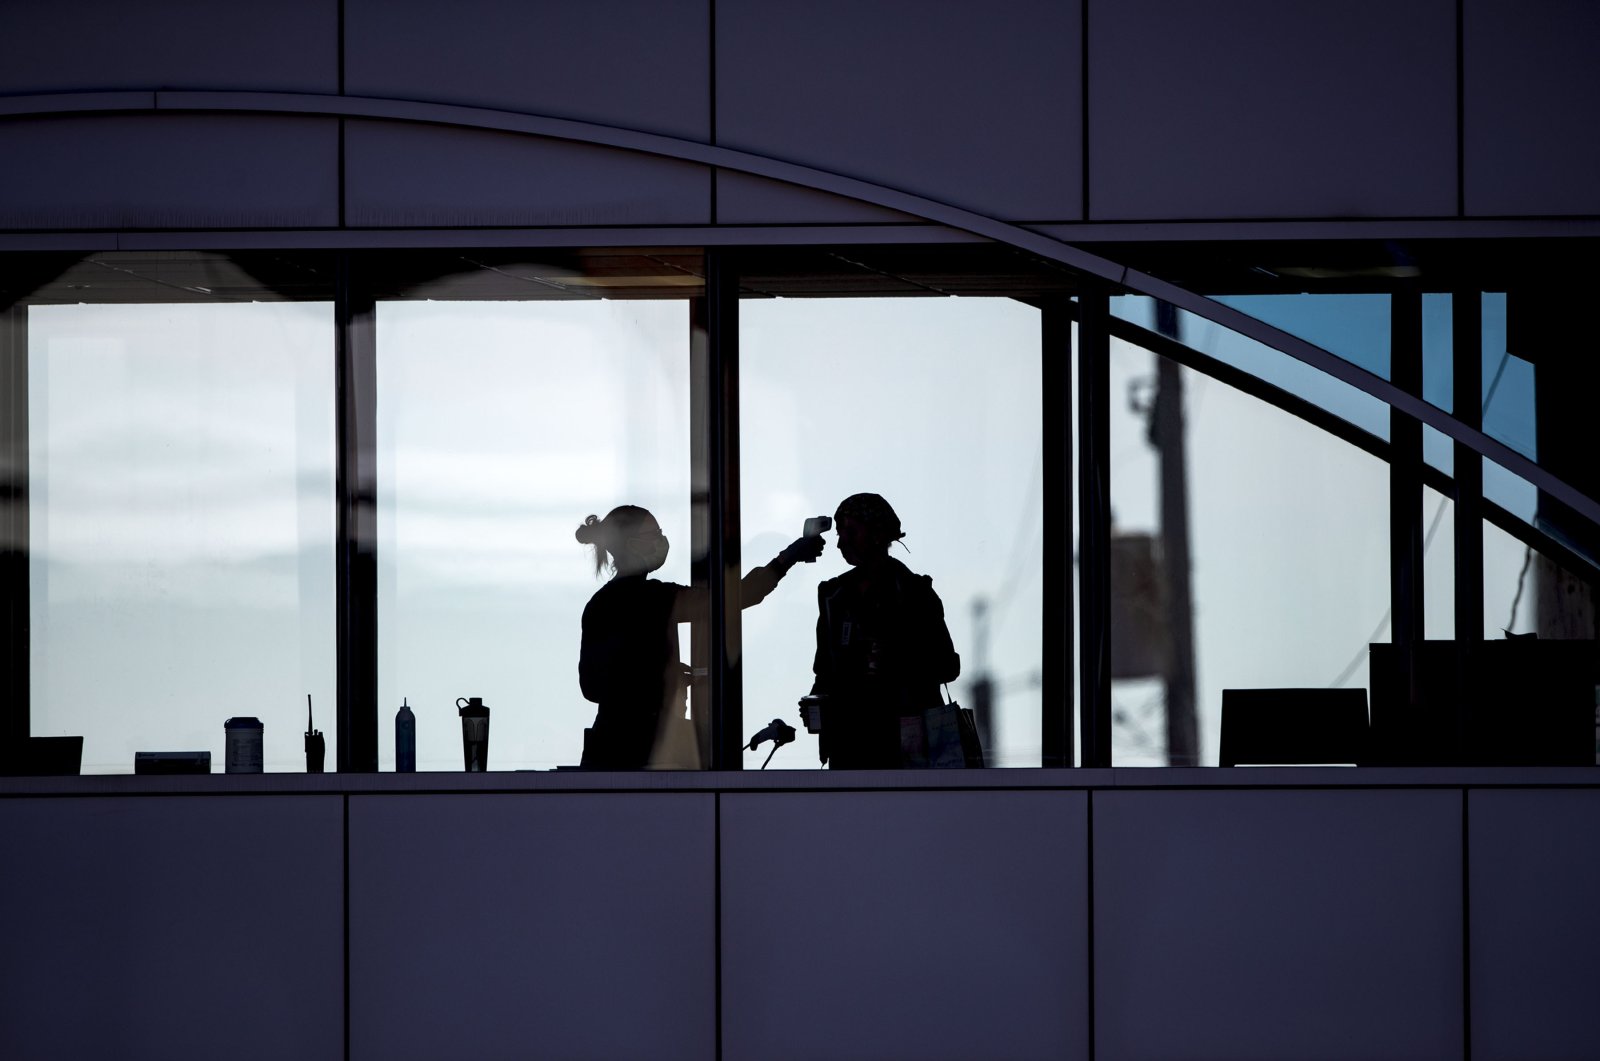 Amid coronavirus concerns, a health care worker takes the temperature of a visitor at Essentia Health who was crossing over a skywalk bridge from the adjoining parking deck in Duluth, Minnesota, April 10, 2020. (AP Photo)